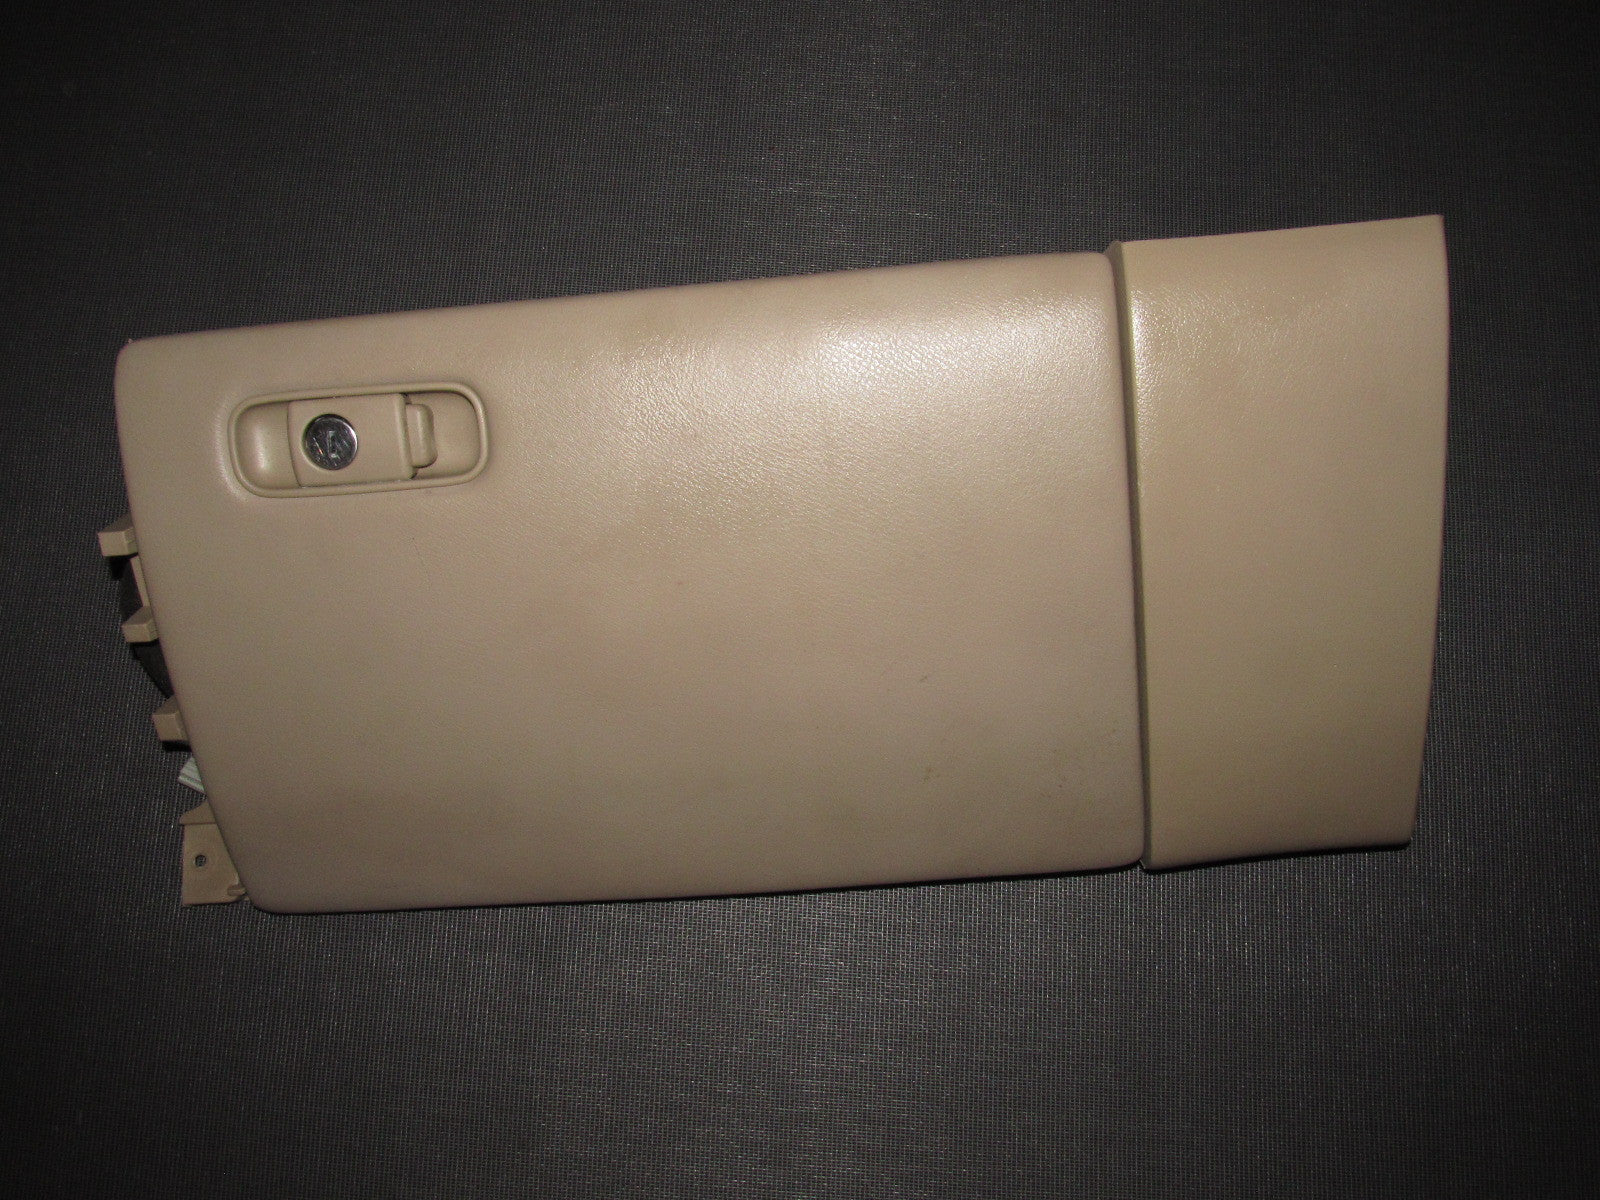 01 02 03 Acura CL OEM Glove Box And Key